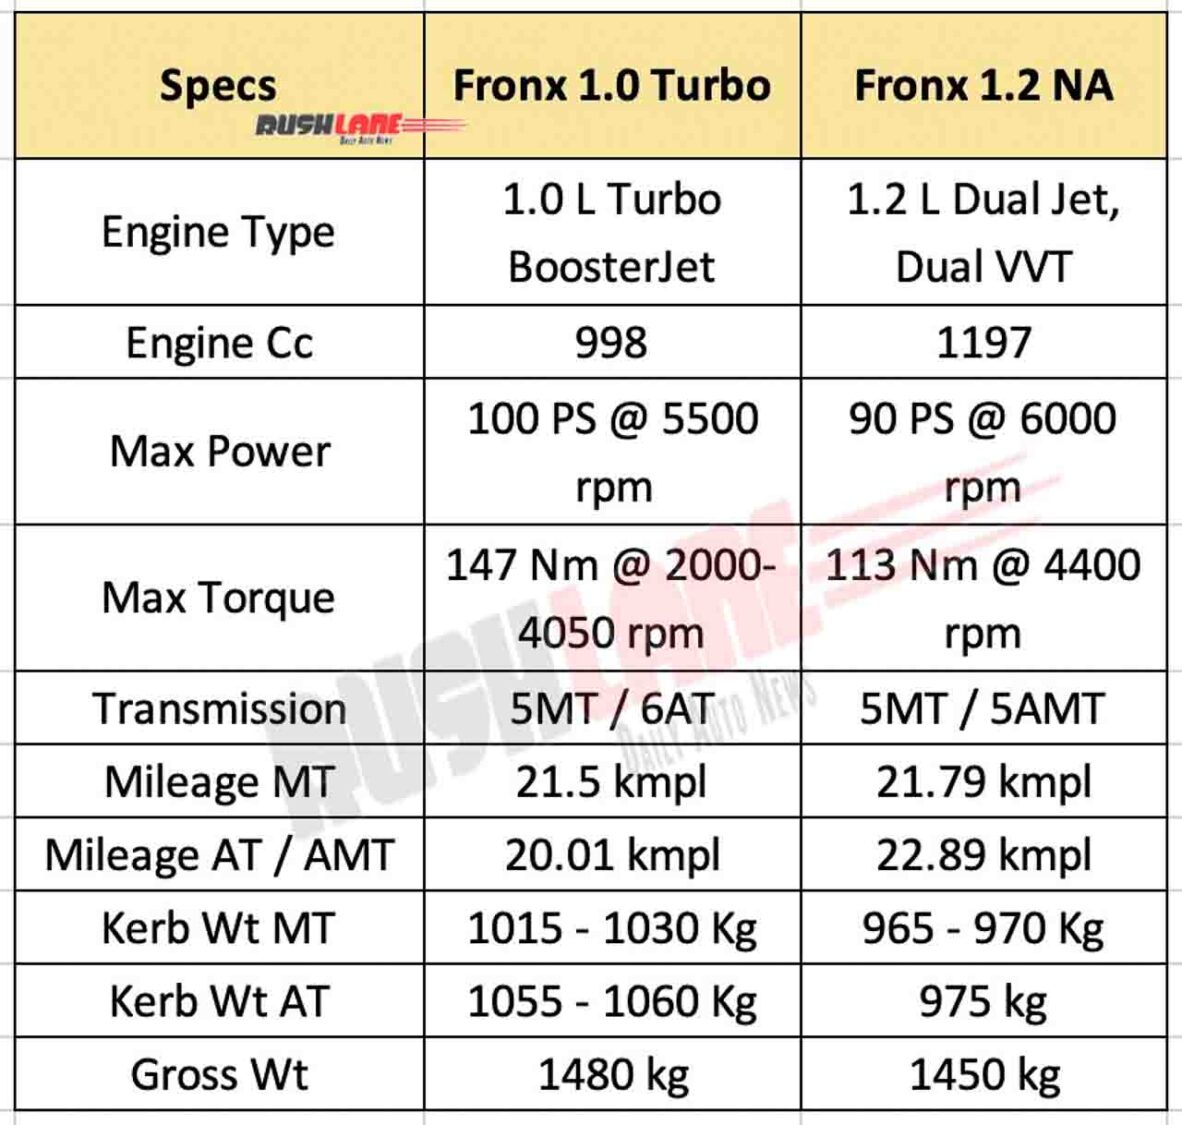 Maruti Fronx Mileage and Weight details